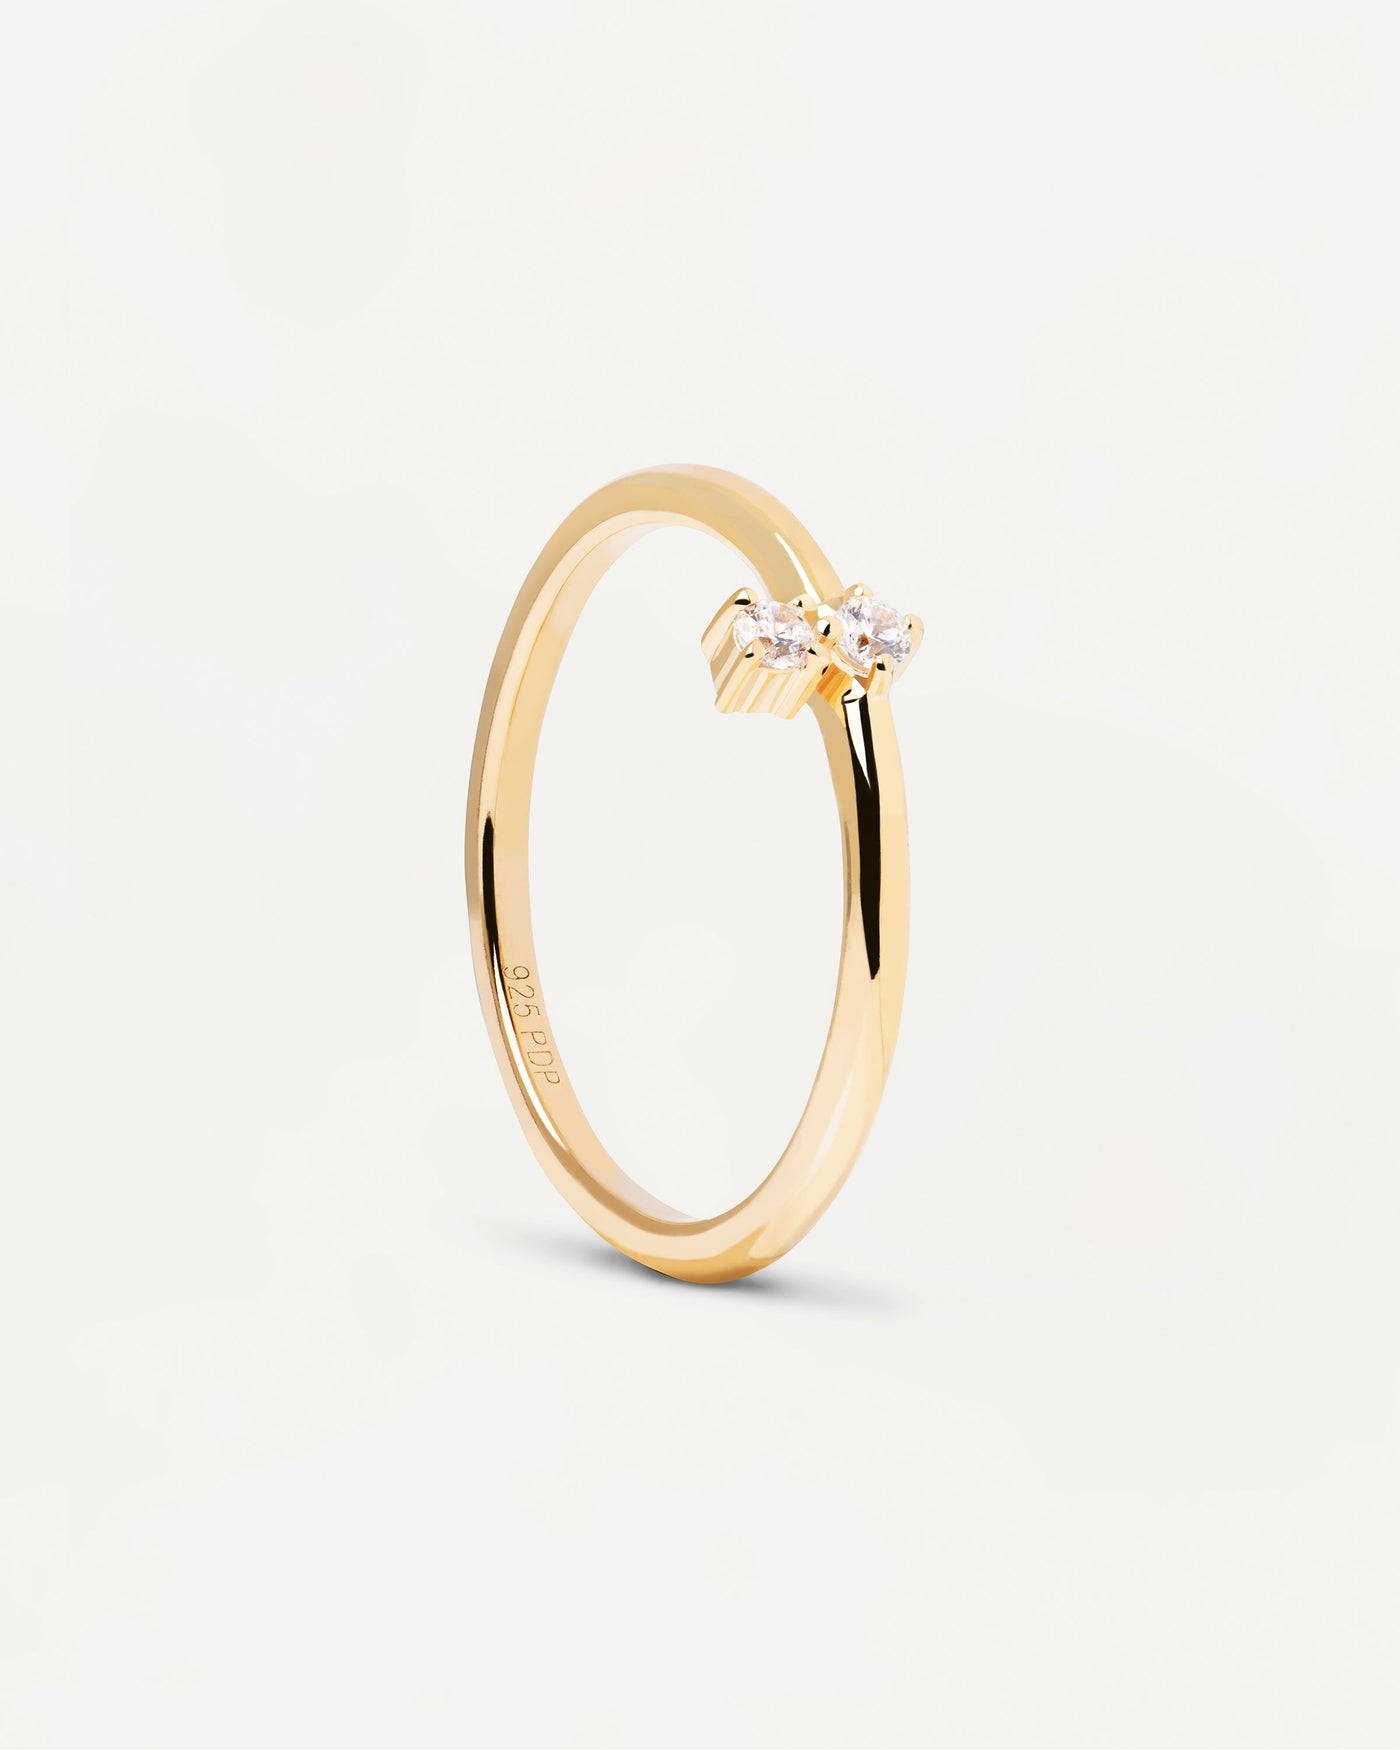 2023 Selection | Ballad Ring. Gold-plated silver ring with dainty white zirconia. Get the latest arrival from PDPAOLA. Place your order safely and get this Best Seller. Free Shipping.